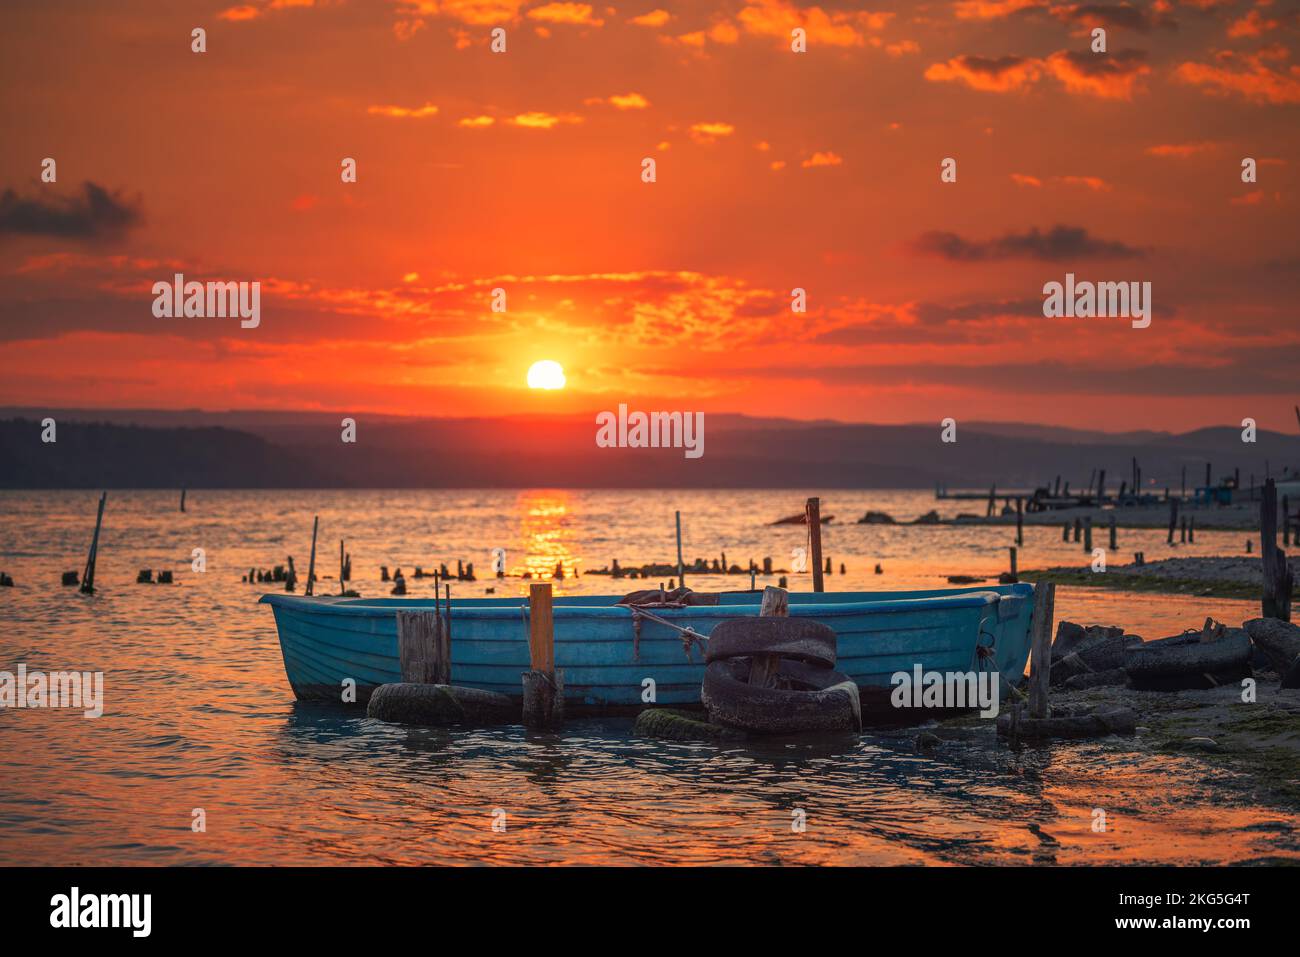 Sunset over lake, wooden pier and old fishing boat Stock Photo